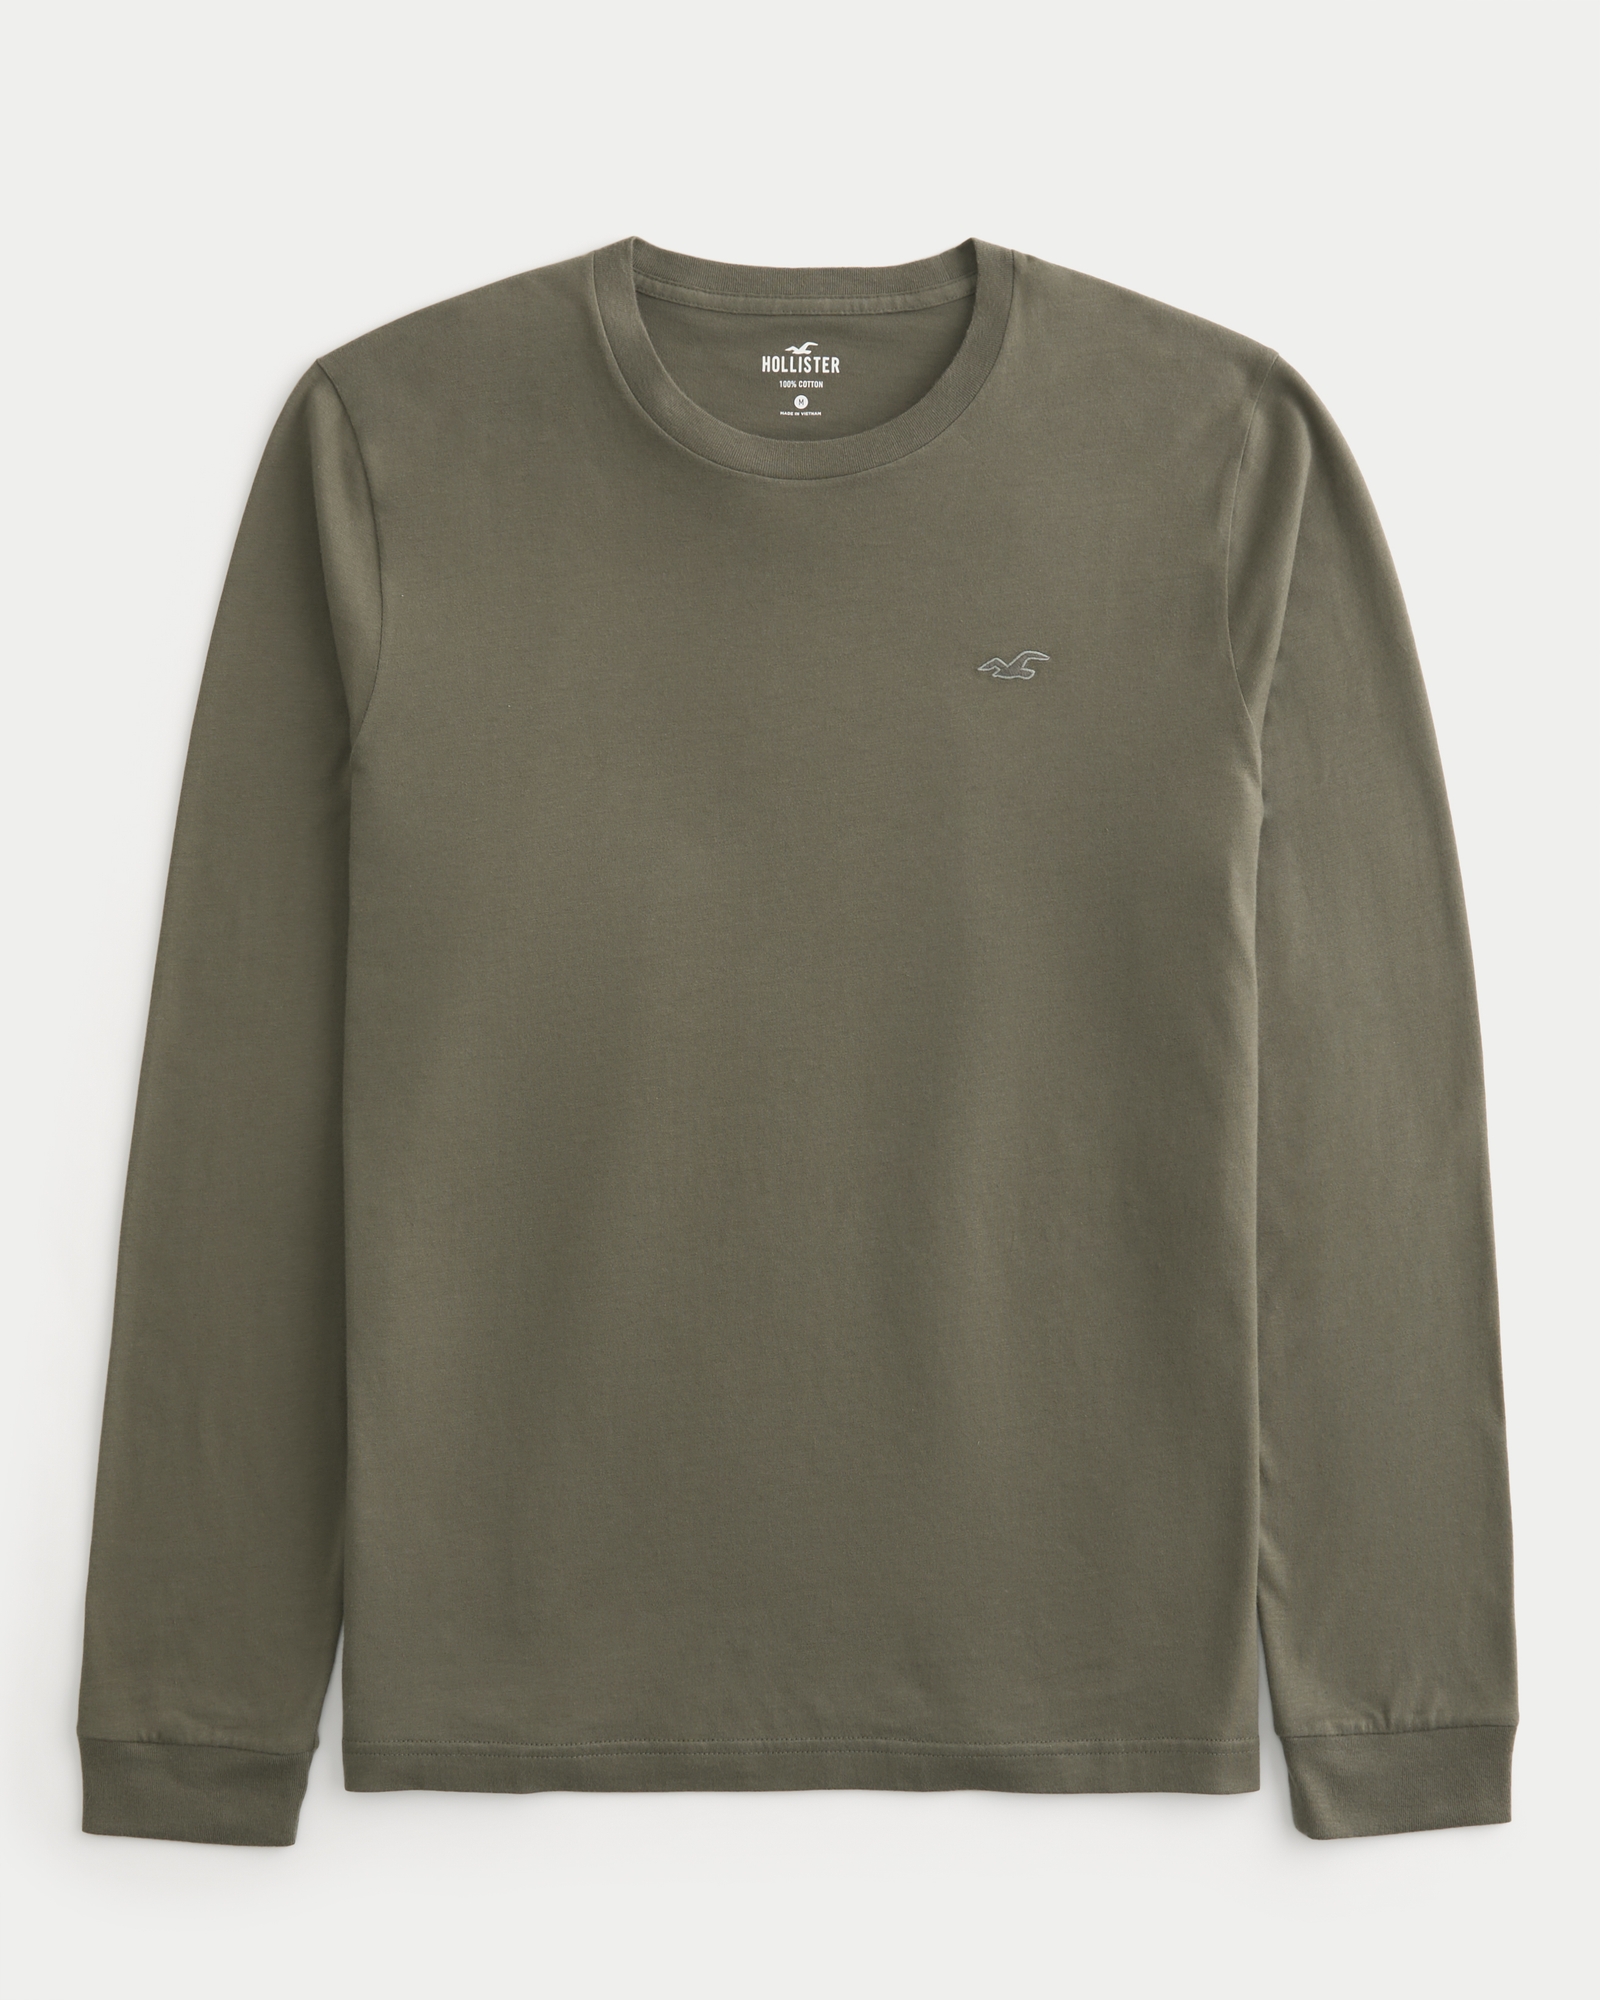 Hollister Must Have Collection Long Sleeve Top Gray Size L - $8 (73% Off  Retail) - From Bas